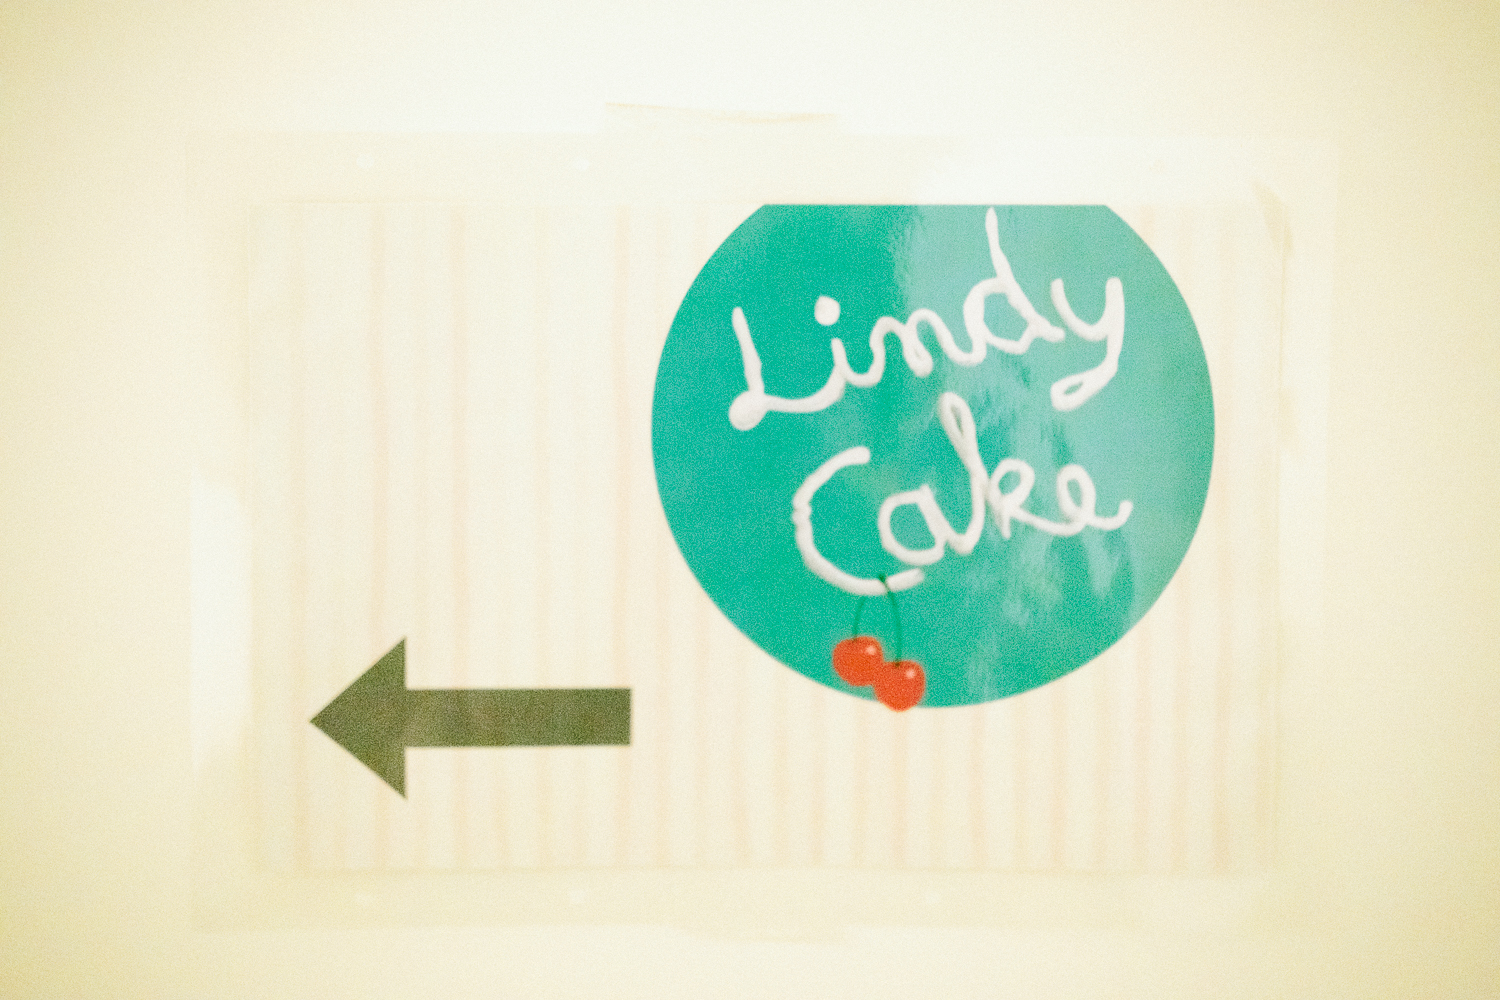  Lindy Cake in Freiburg - Photo Credit: For Dancers Only (http://d.pr/1fEEY) - http://www.ebobrie.com/lindy-cake-2015 